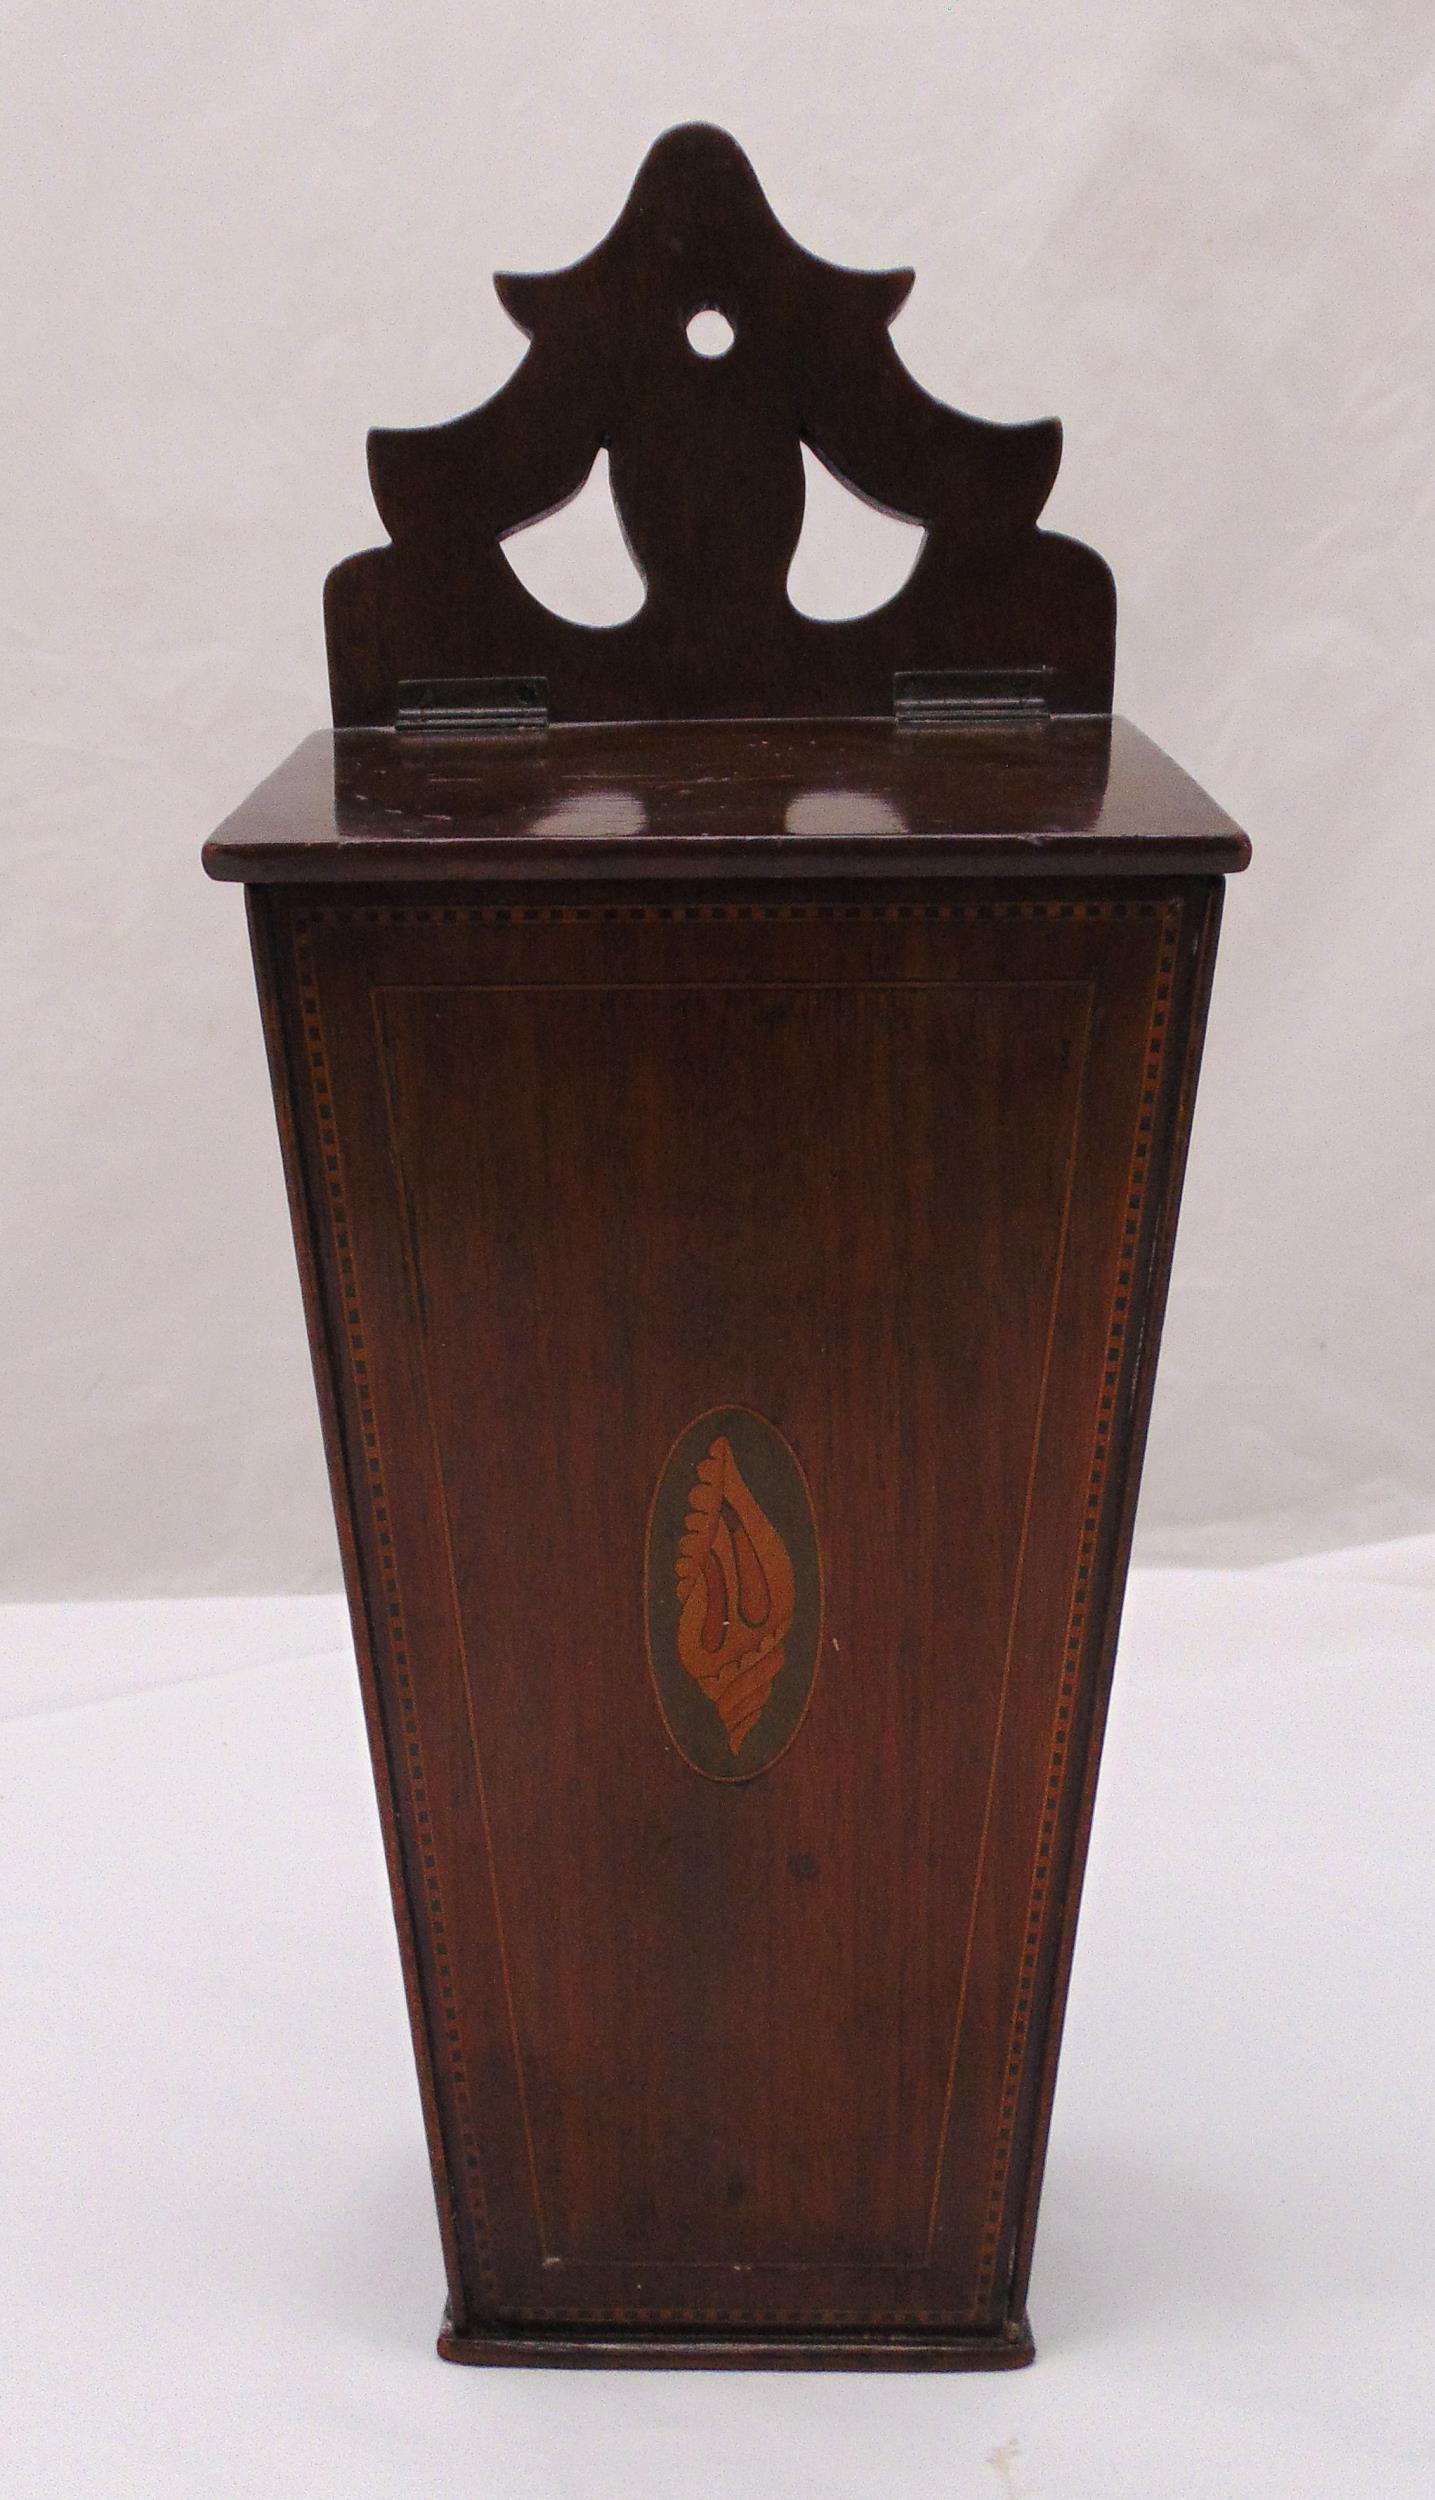 An Edwardian mahogany candle box tapering rectangular, inlaid with satinwood detail with scroll